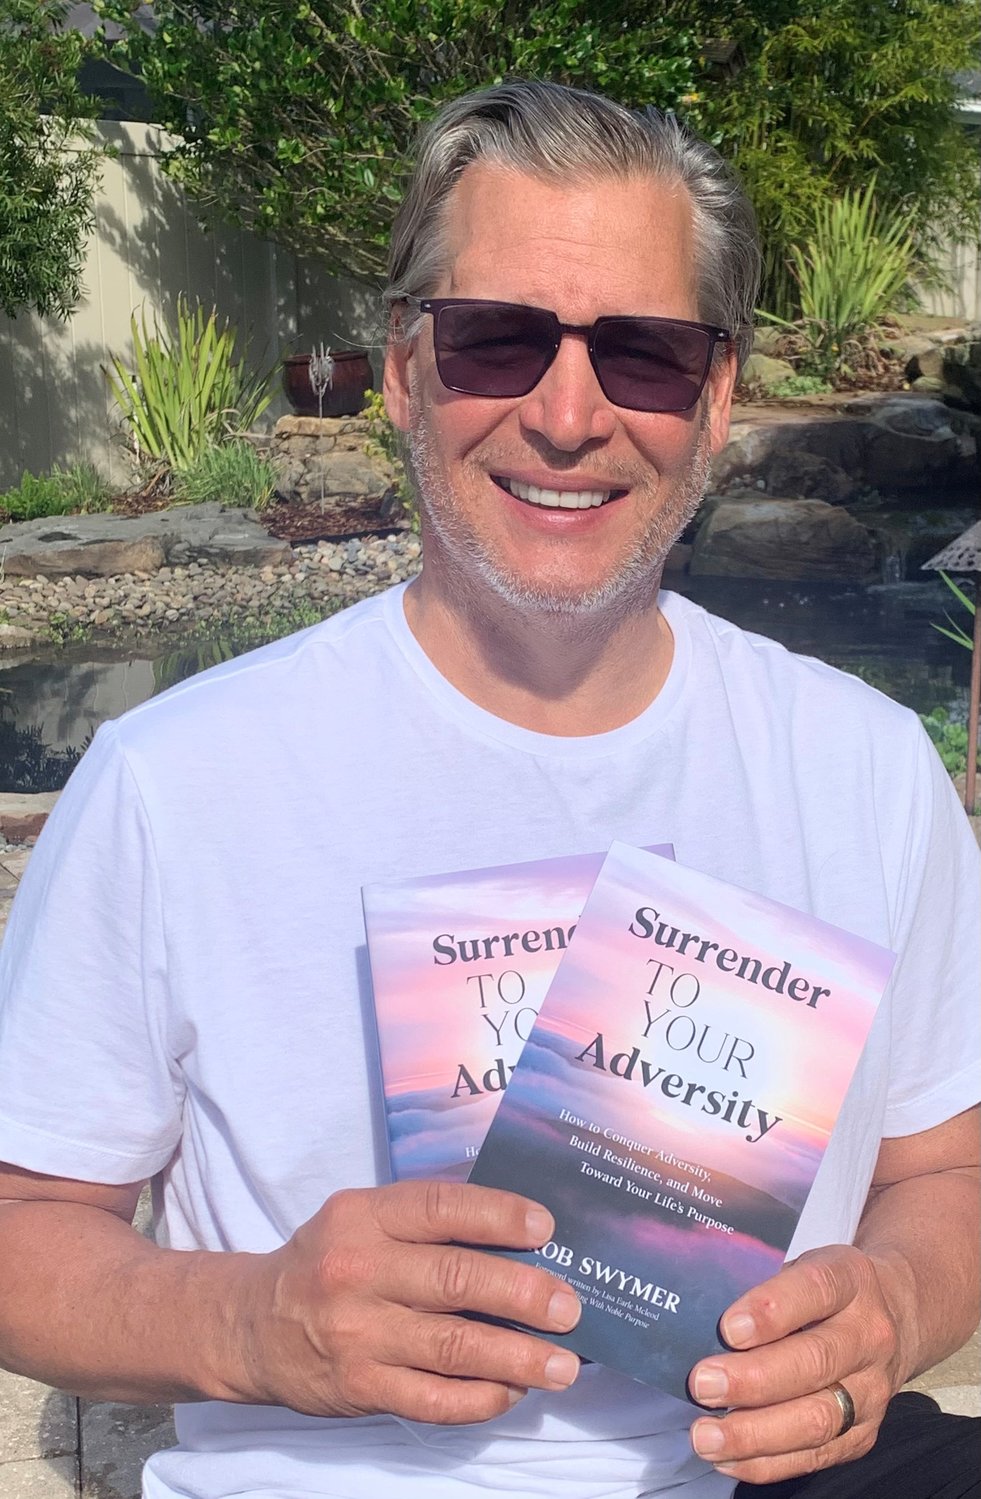 Rob Swymer holds up copies of his book, “Surrender to Your Adversity.”